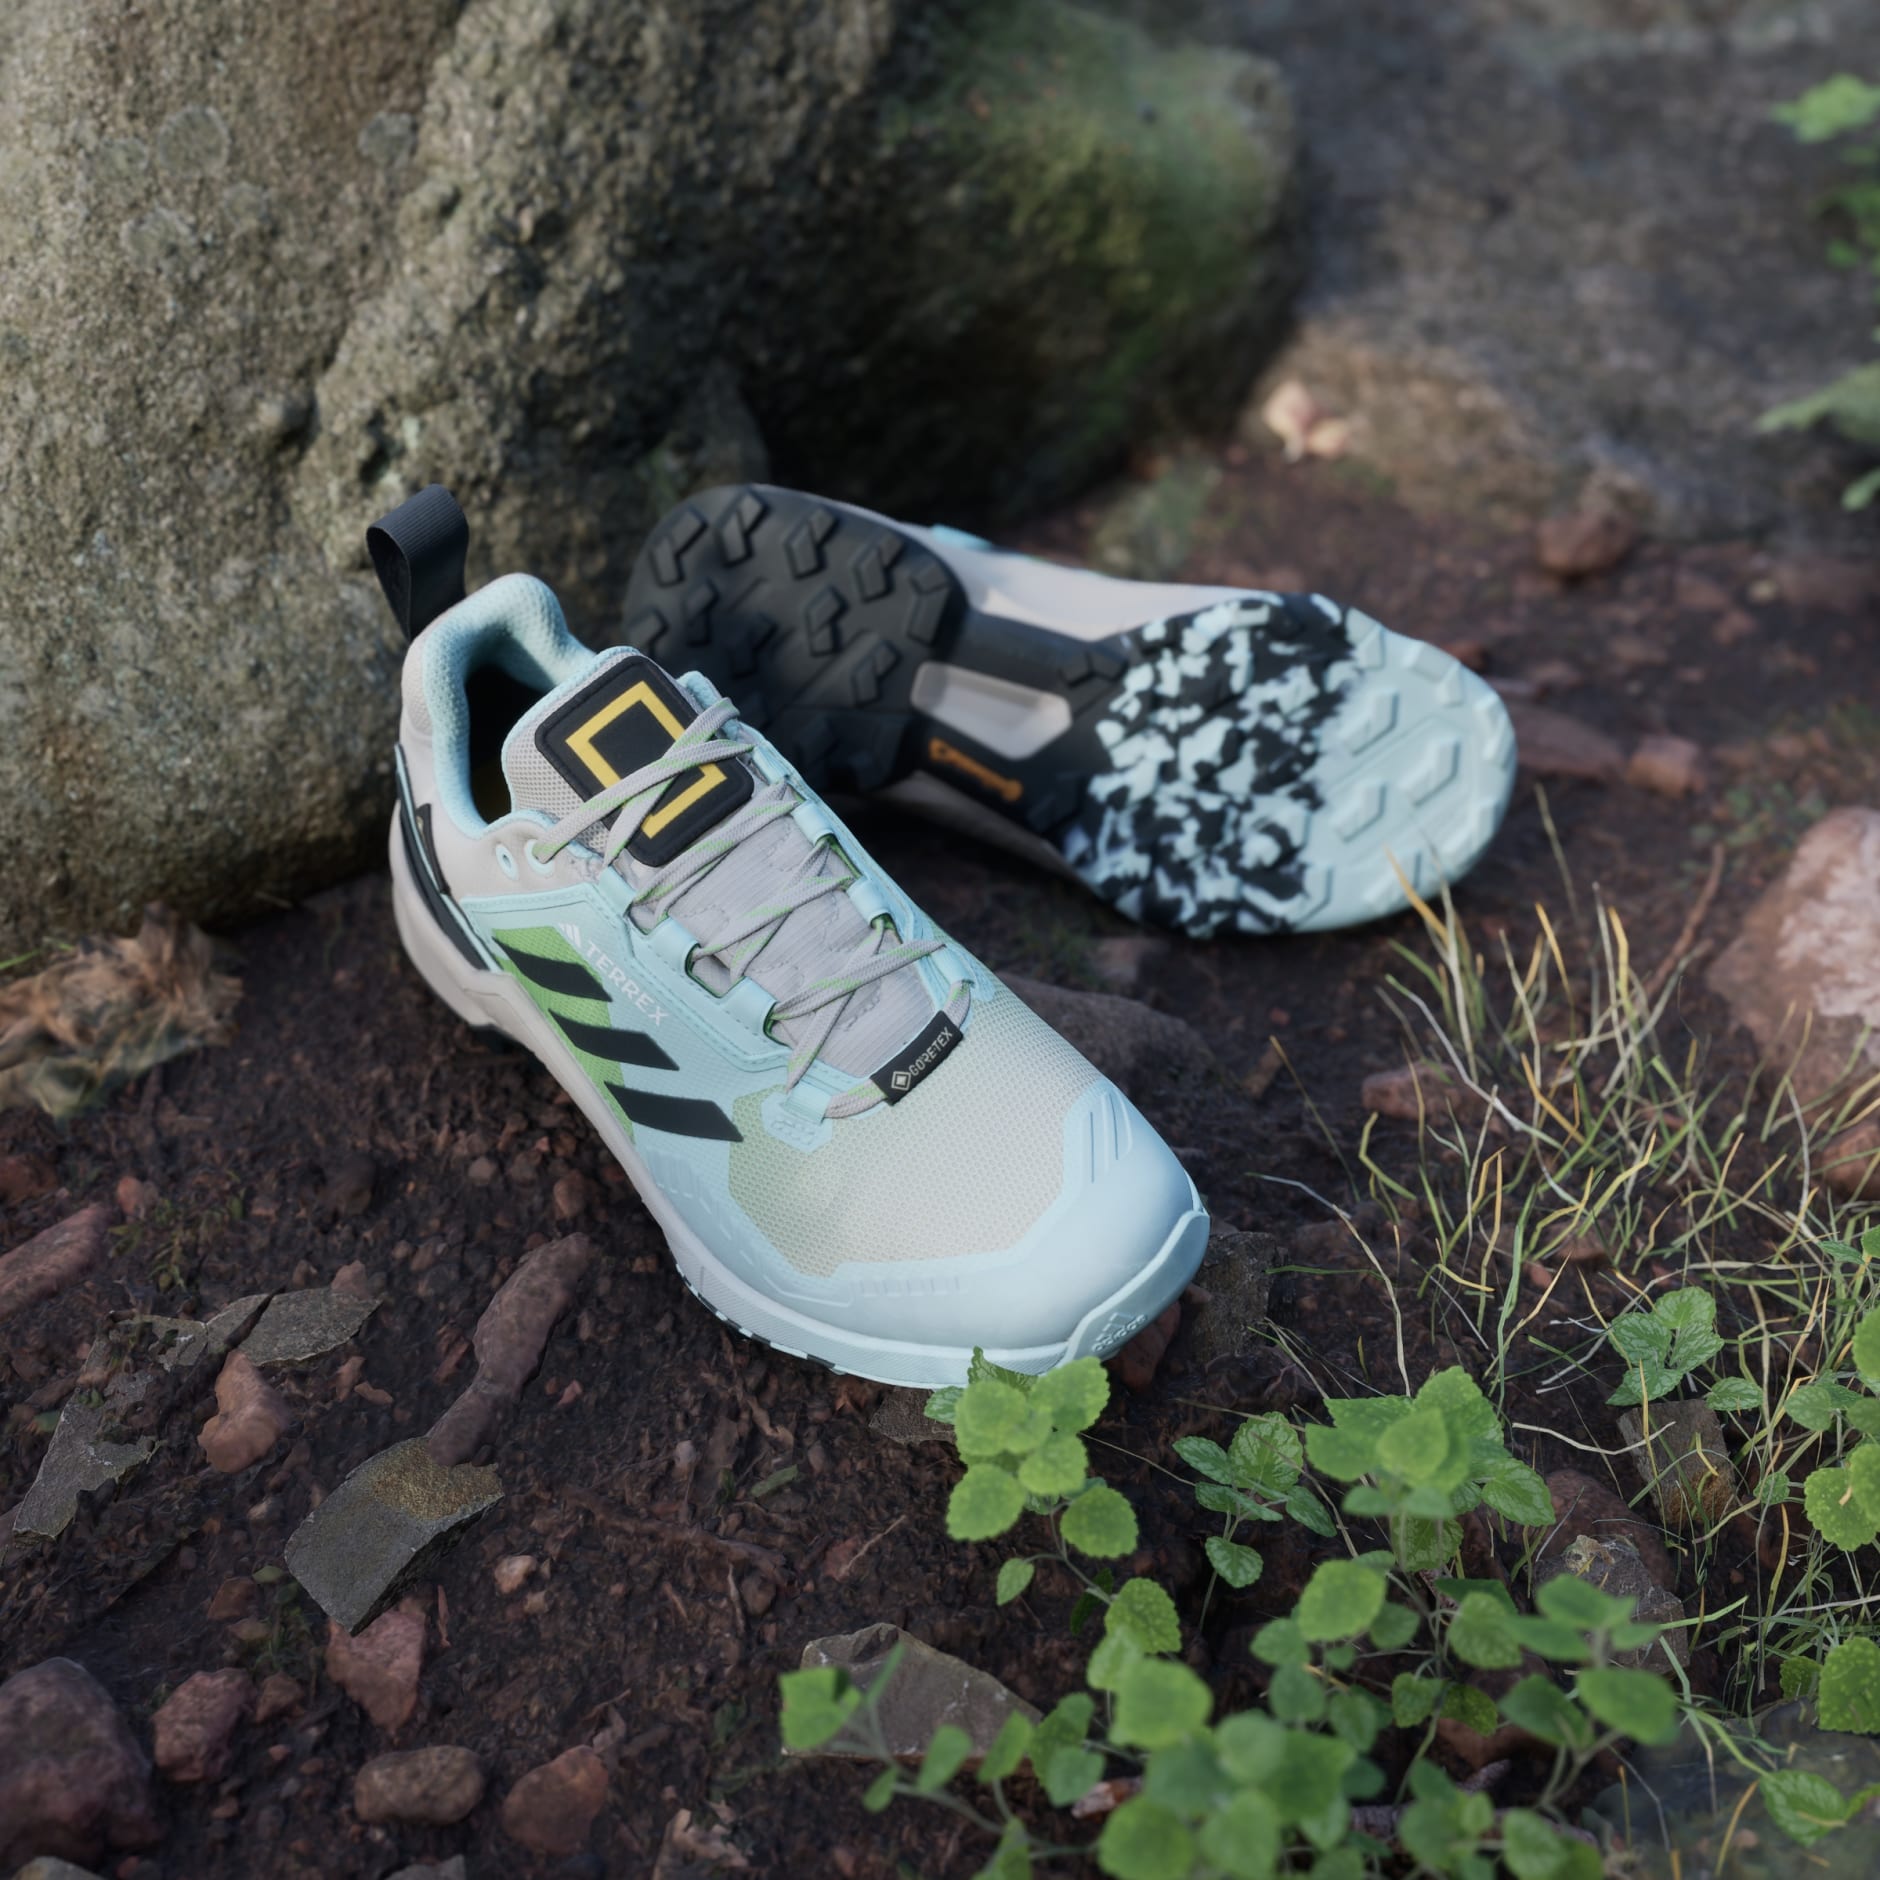 Shoes - Terrex Swift R3 GORE-TEX Hiking Shoes - Turquoise | adidas